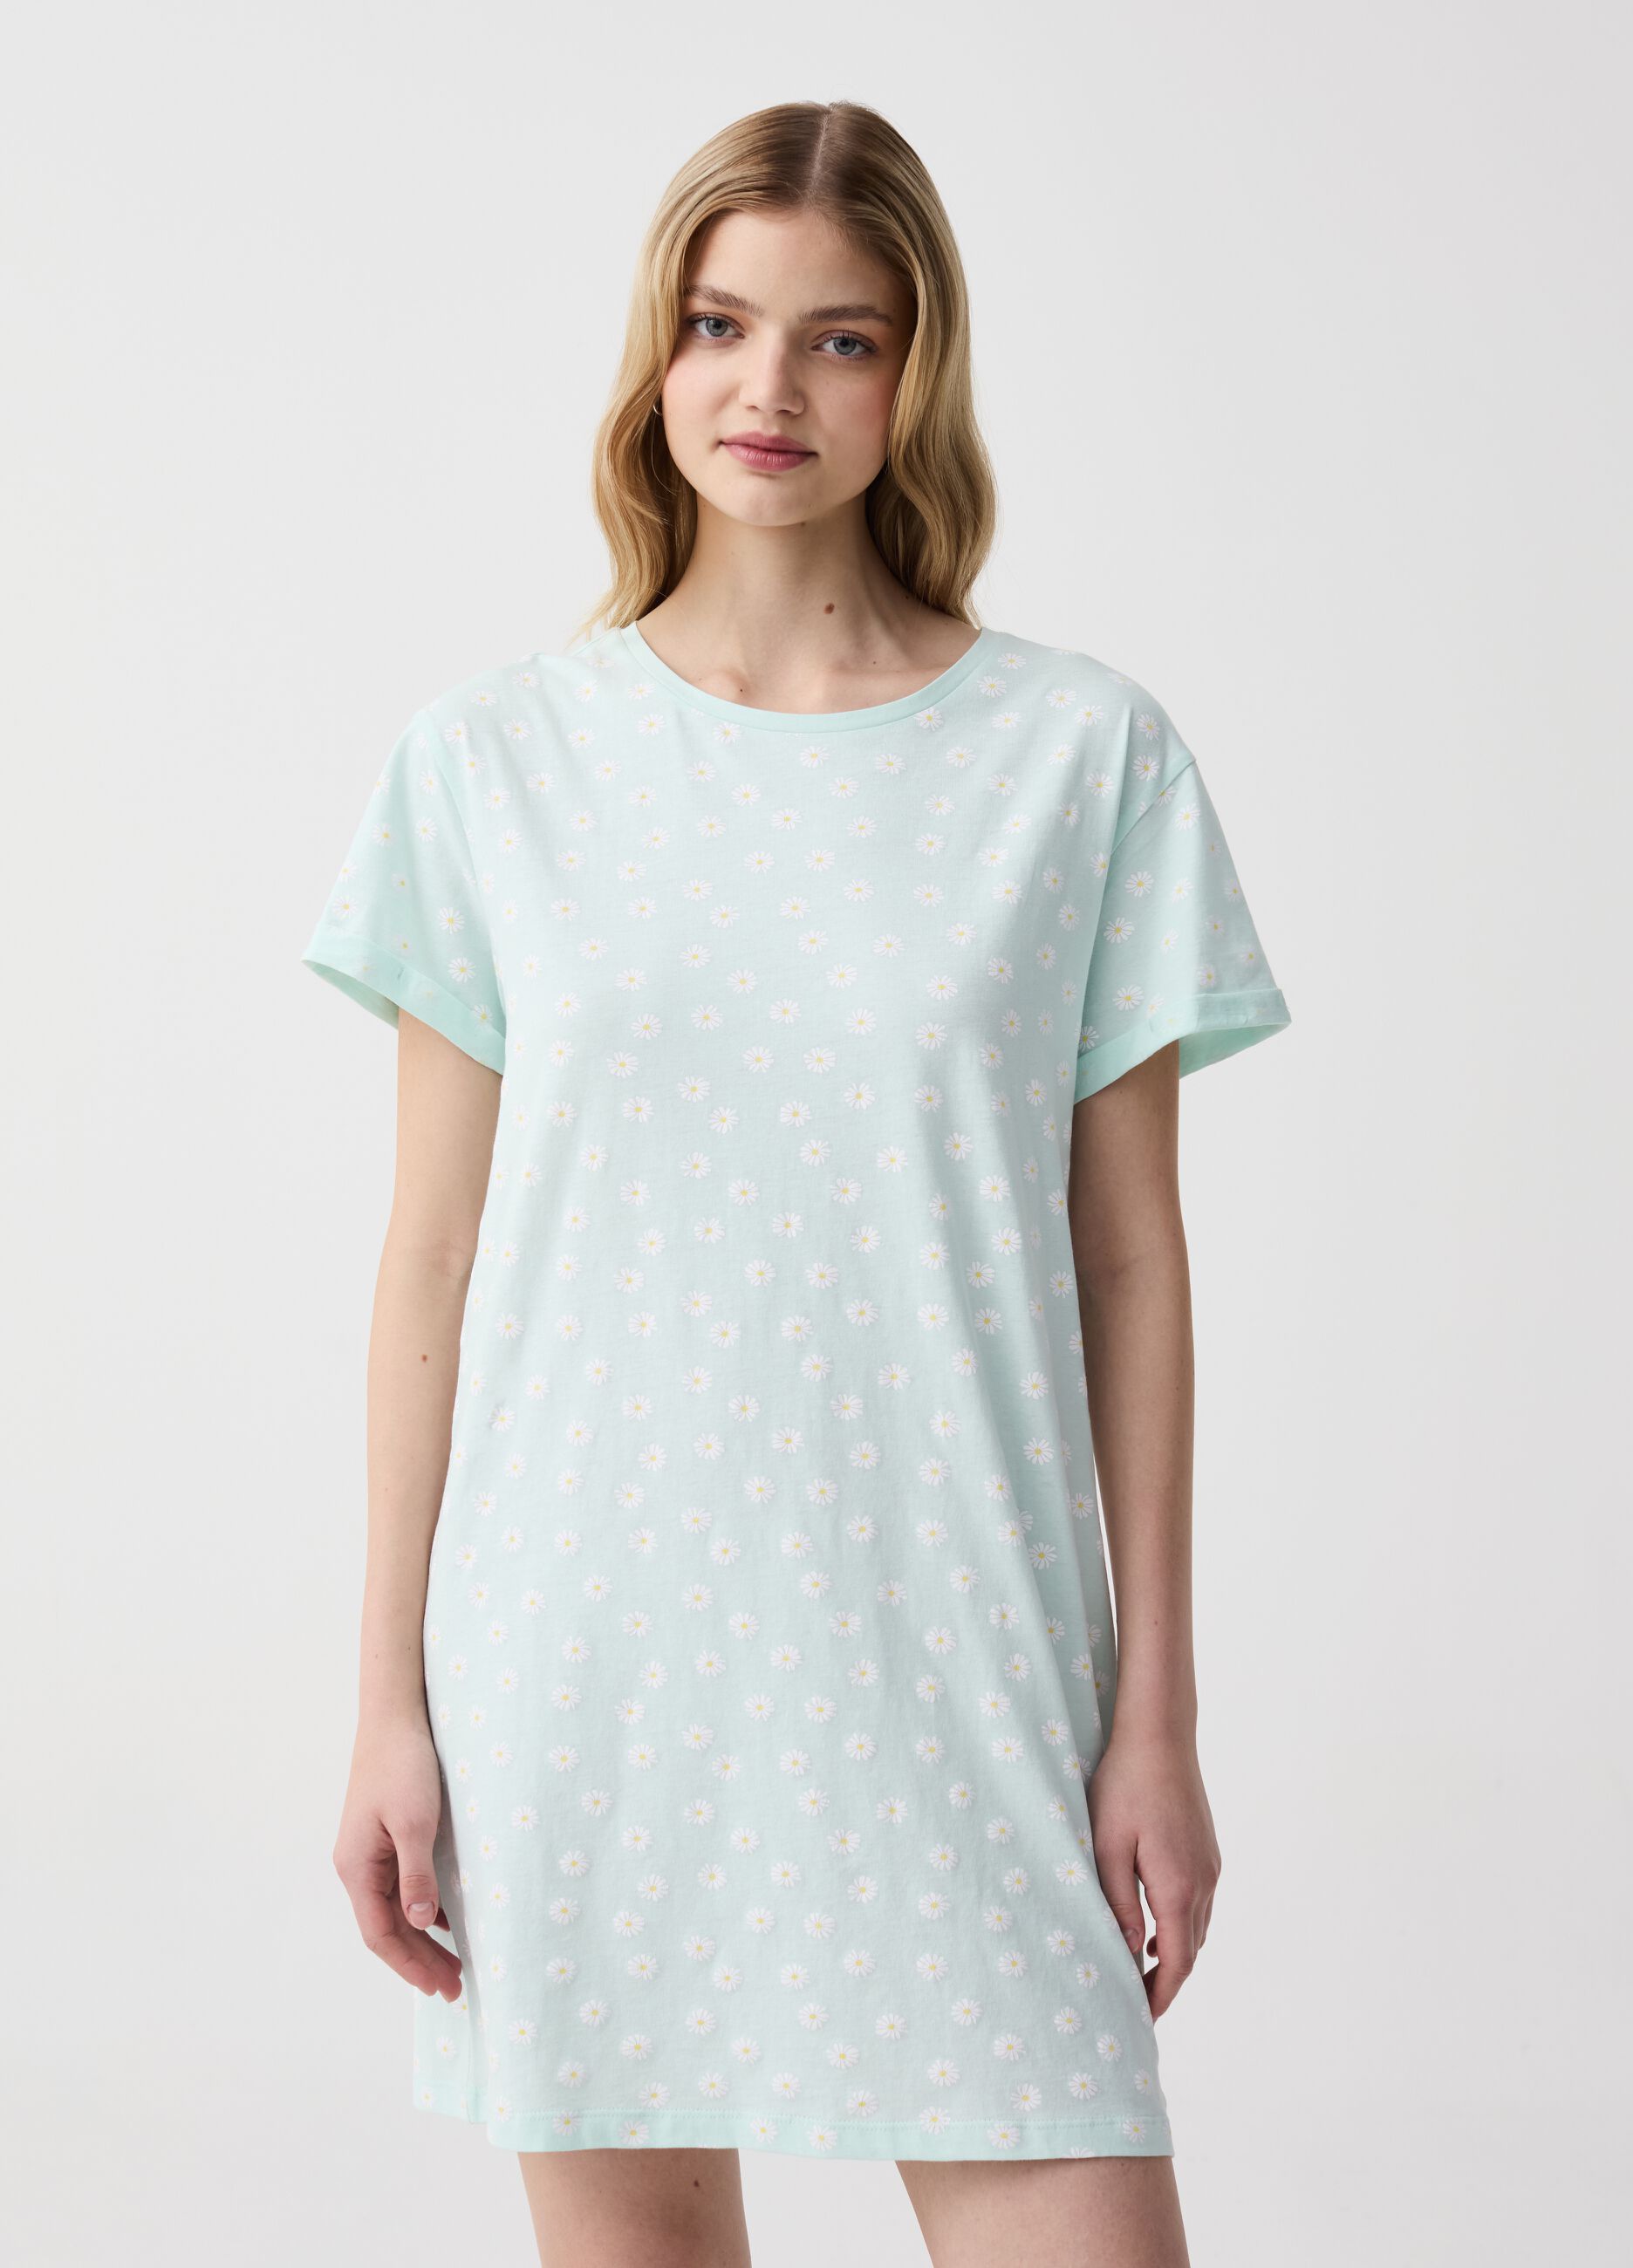 Nightdress with daisies print